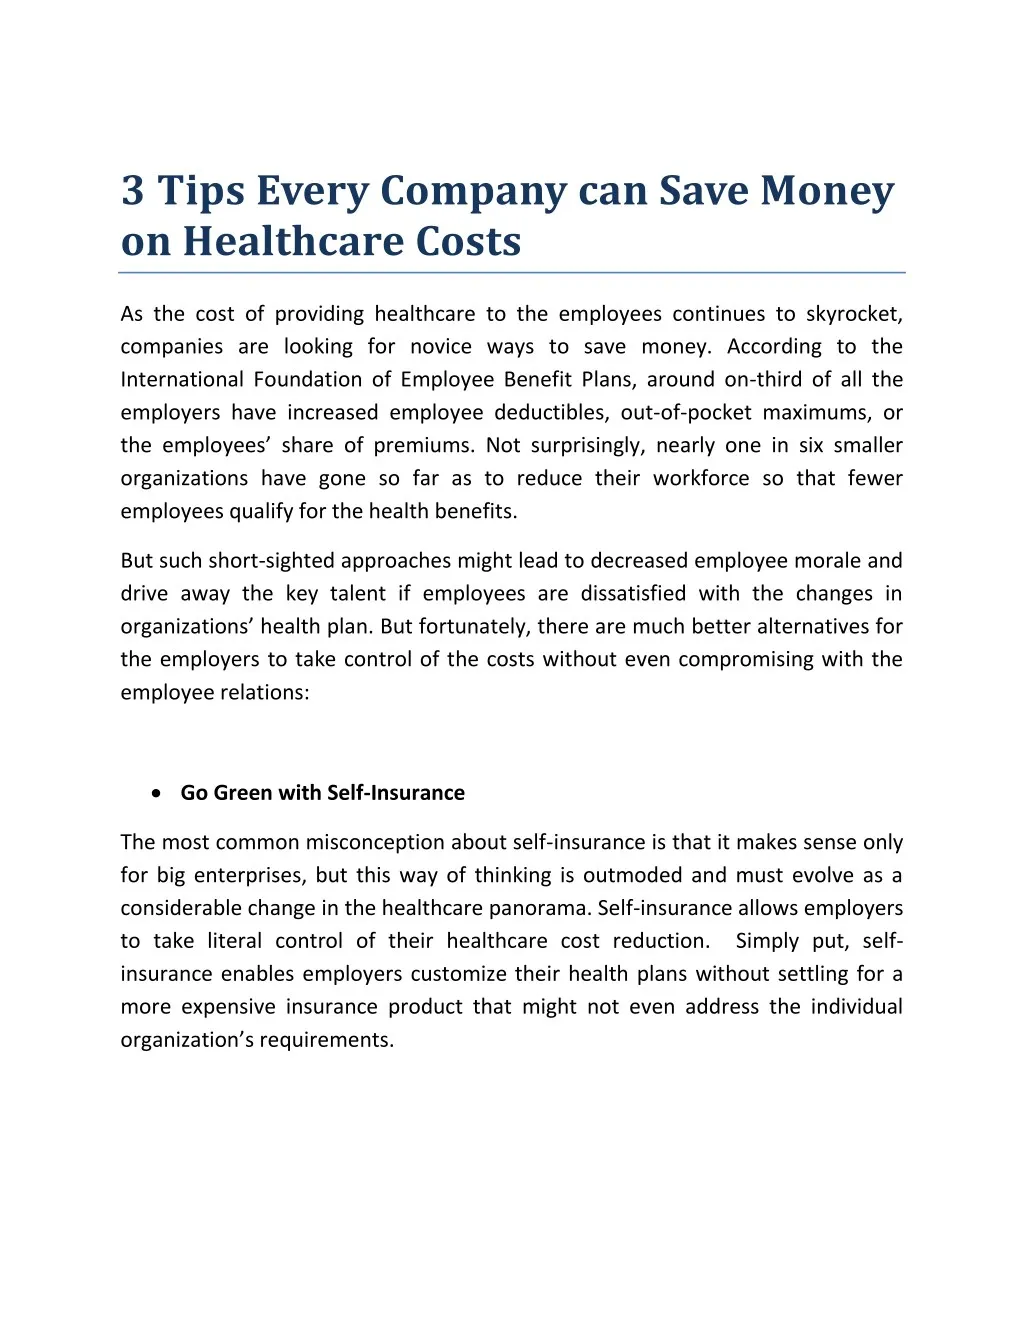 3 tips every company can save money on healthcare